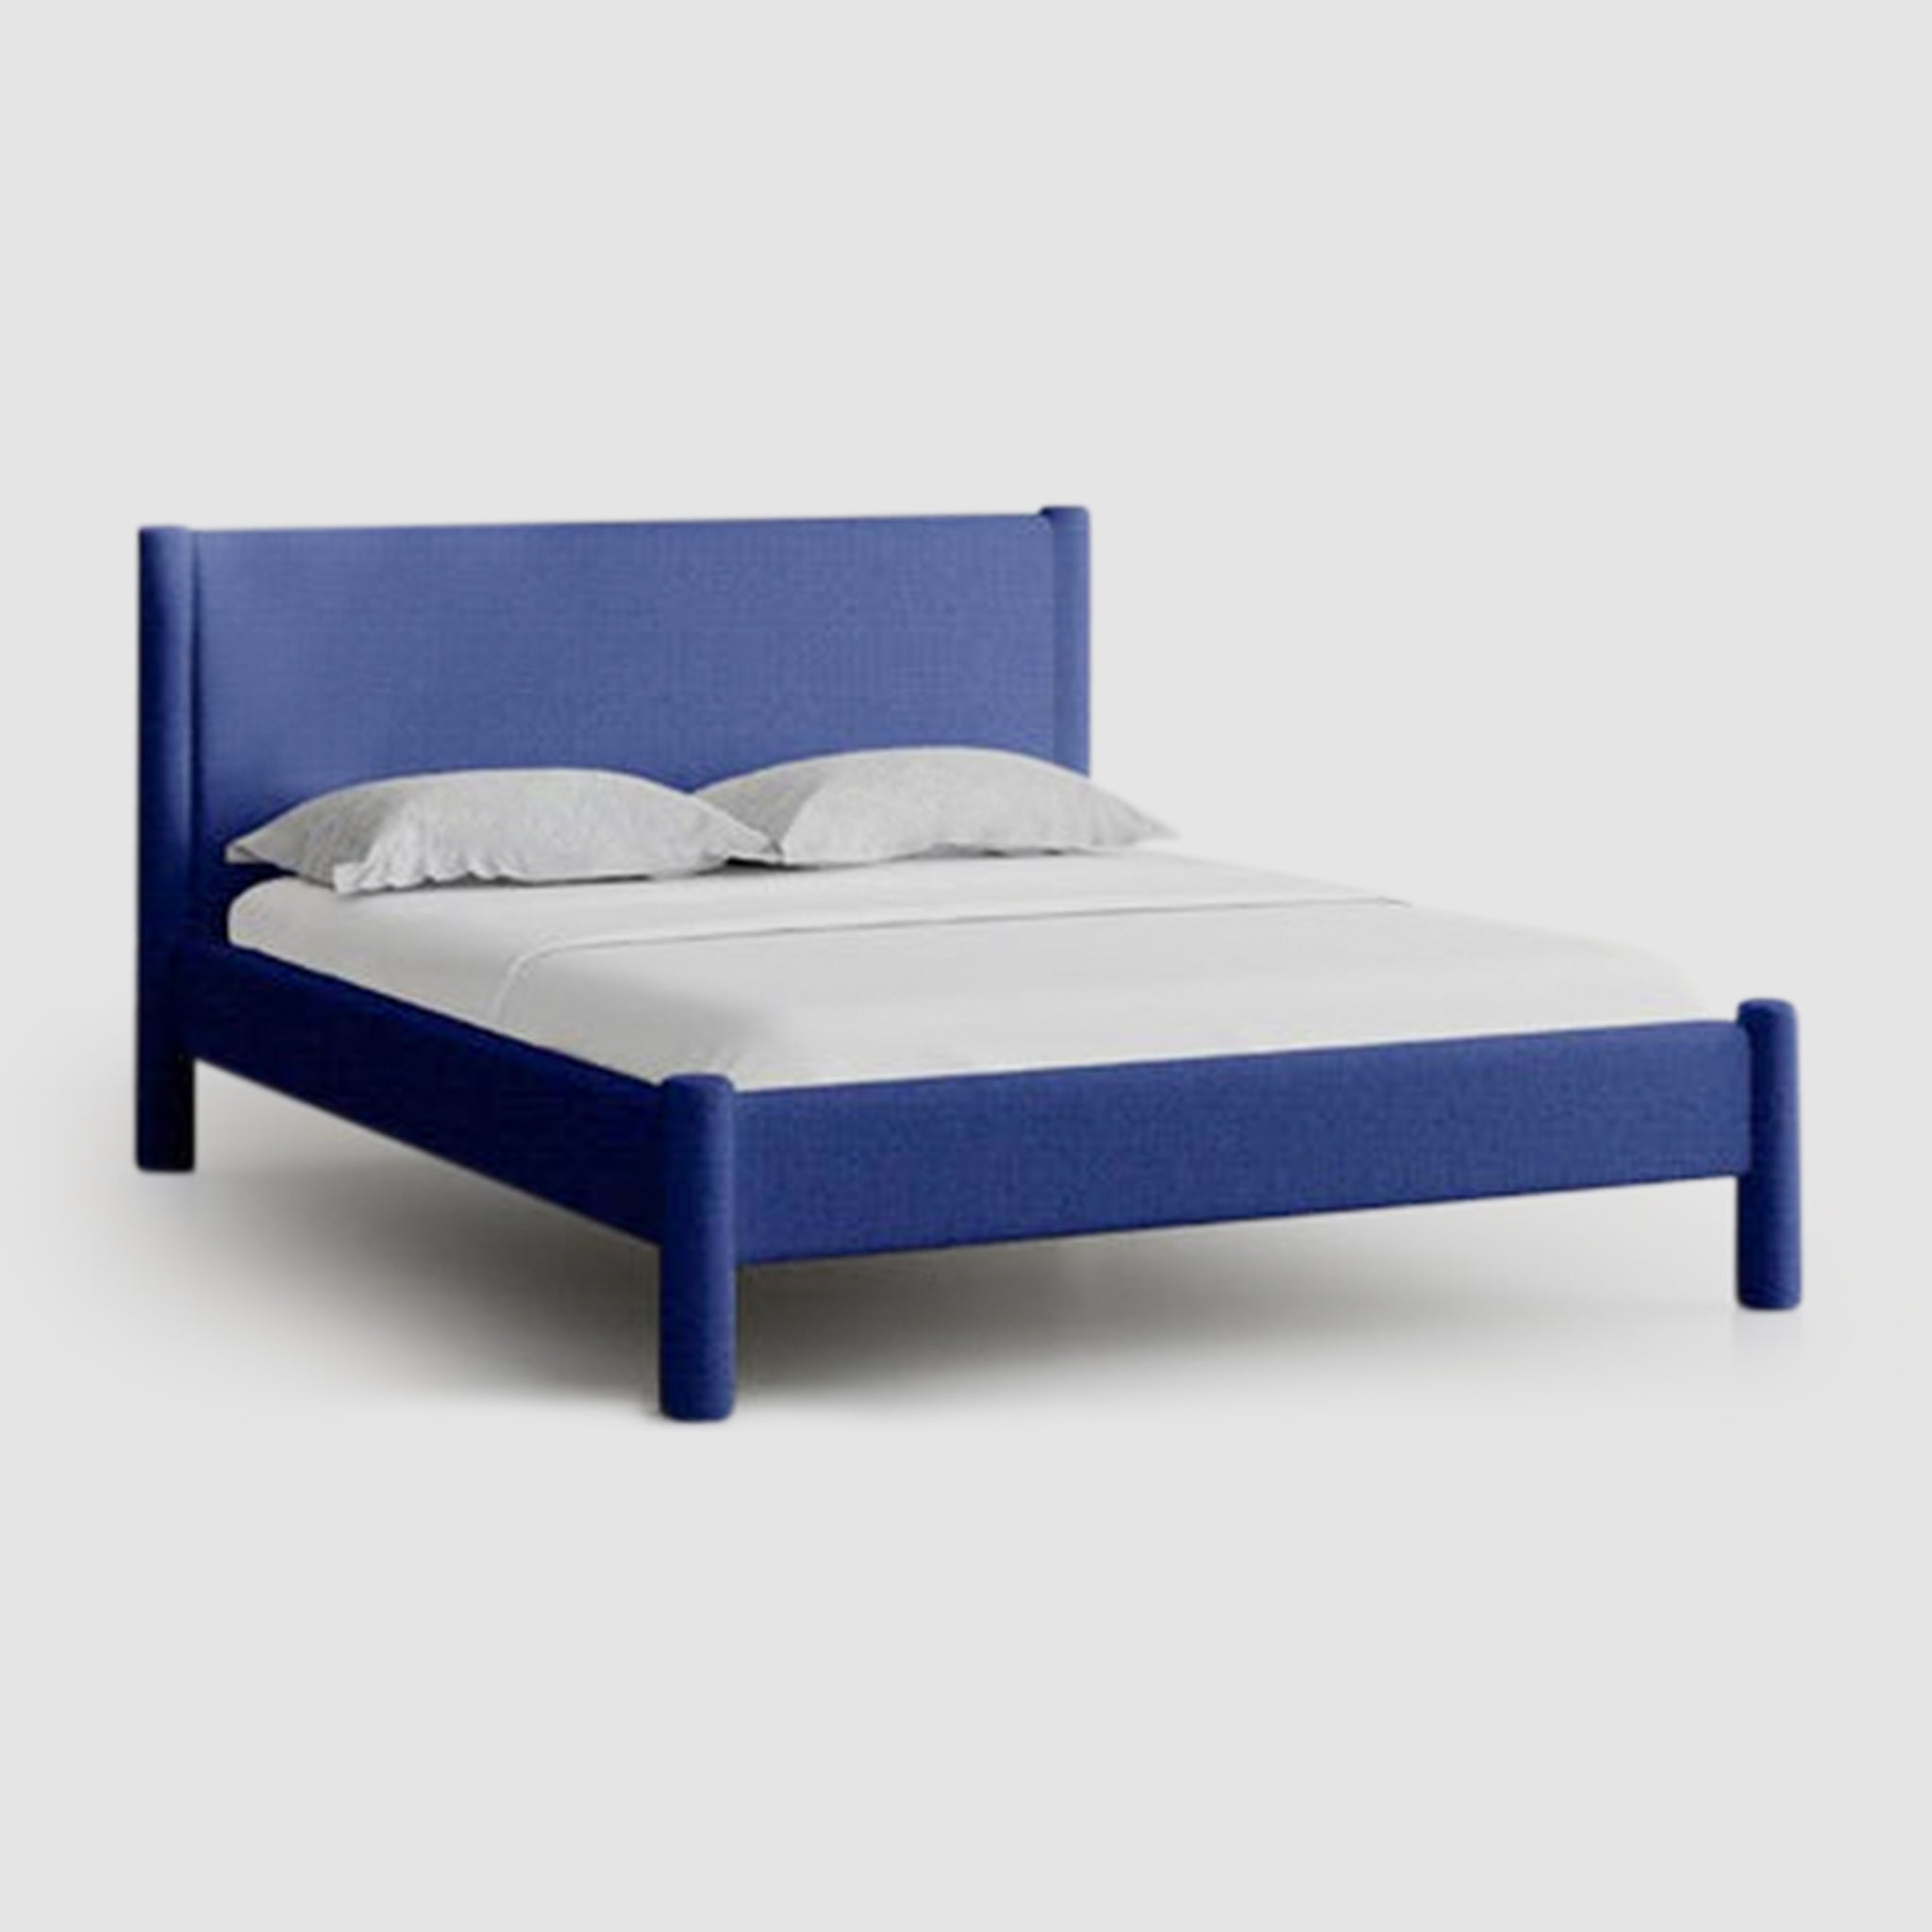 The Carrie Bed with robust beech wood frame, available in Queen, King, and Super King.